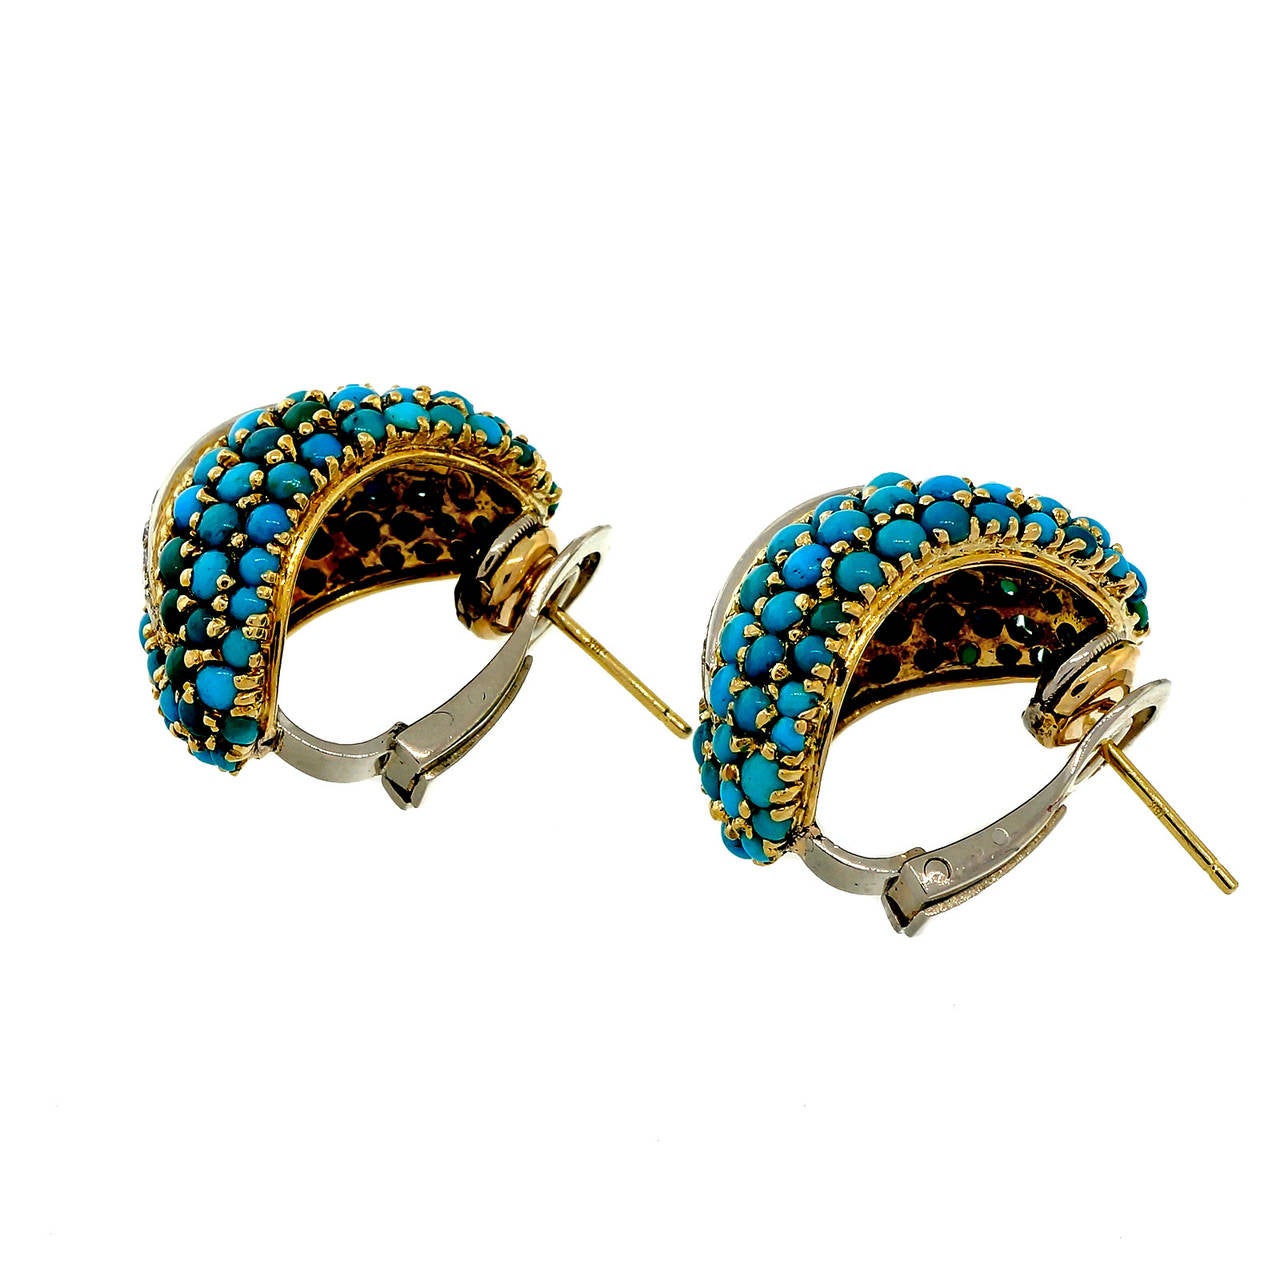 Natural untreated Persian Turquoise 18k yellow gold clip post earrings with white gold under the diamonds and on the clips. Circa 1950-1960.

160 round natural blue Turquoise 1.5 to 2mm
18 round single cut diamonds, approx. total weight .24cts,